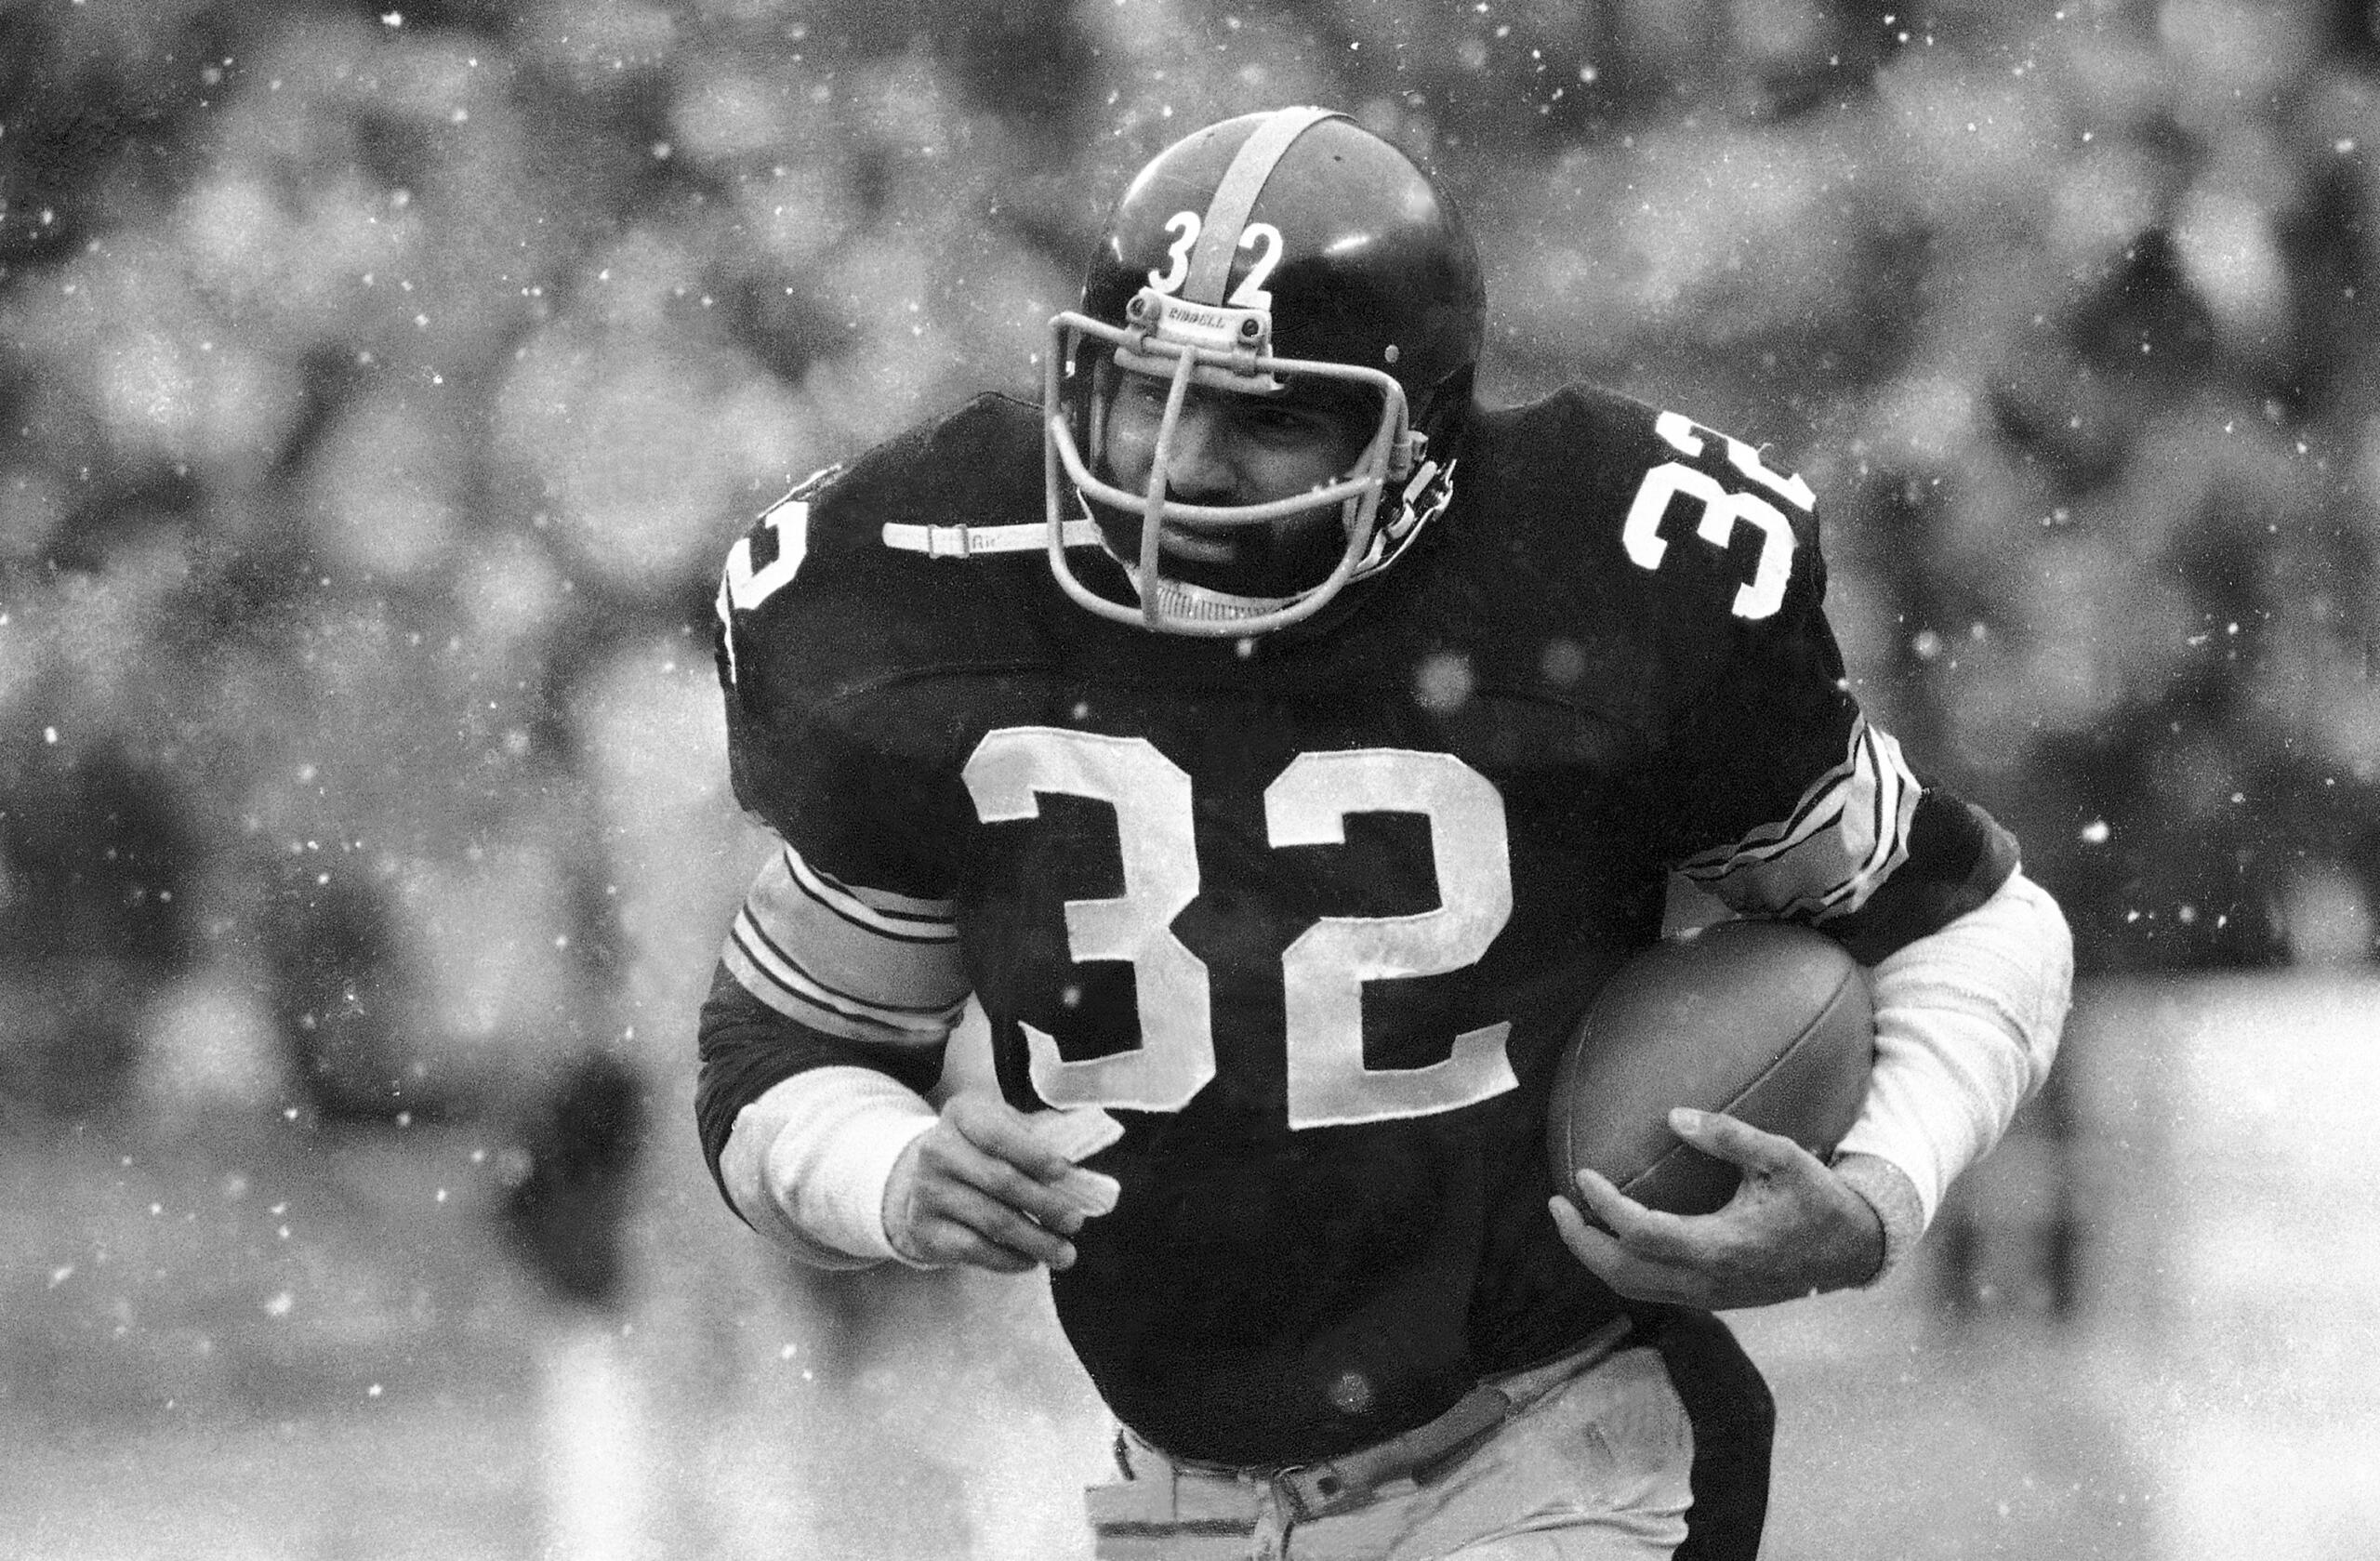 FILE - Franco Harris of the Pittsburgh Steelers runs against the Seattle Seahawks in first period action Sunday, Sept. 10, 1978, in Pittsburgh. Franco Harris, the Hall of Fame running back whose heads-up thinking authored “The Immaculate Reception,” considered the most iconic play in NFL history, died Wednesday, Dec. 21, 2022. He was 72.